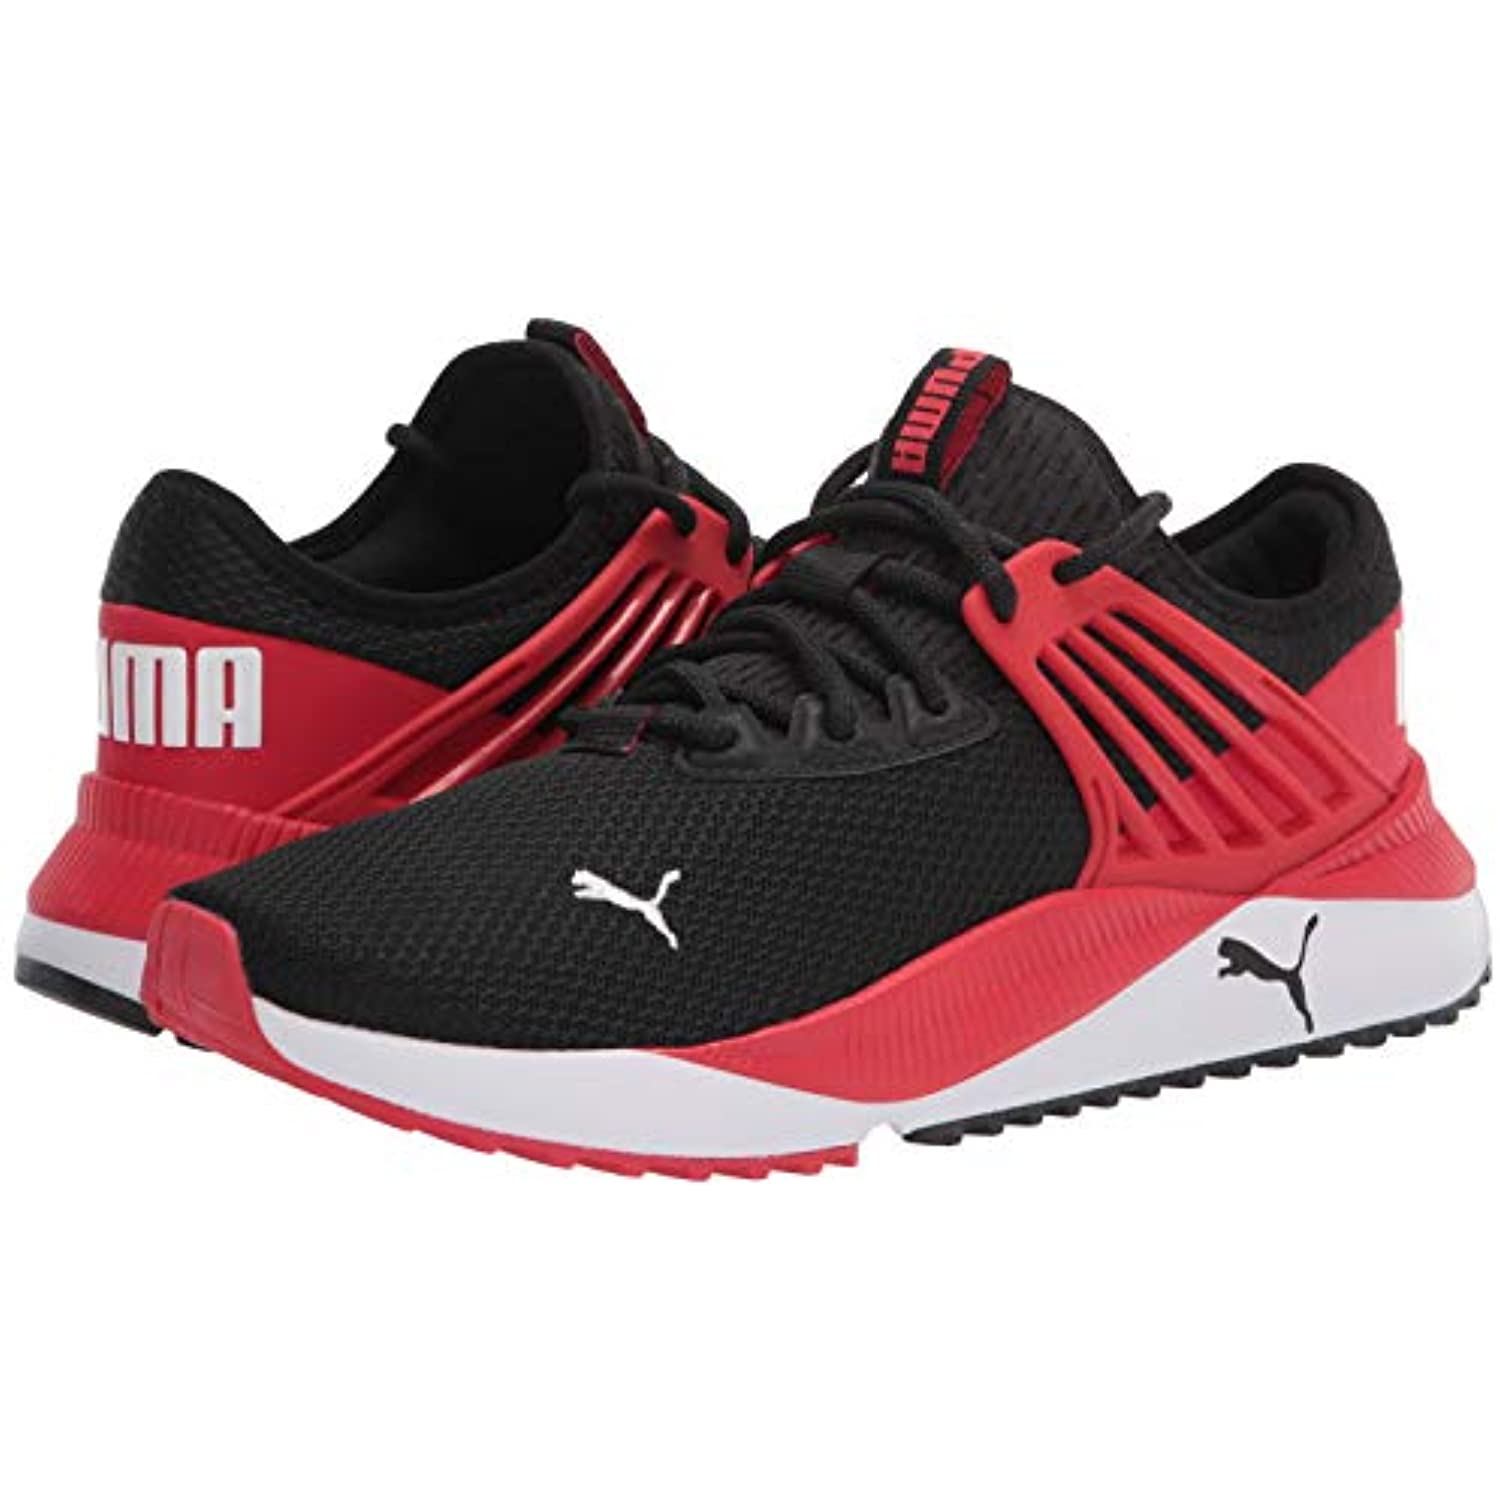 PUMA Men's Pacer Future Sneaker, Black-High Risk Red White, 12 - image 4 of 8